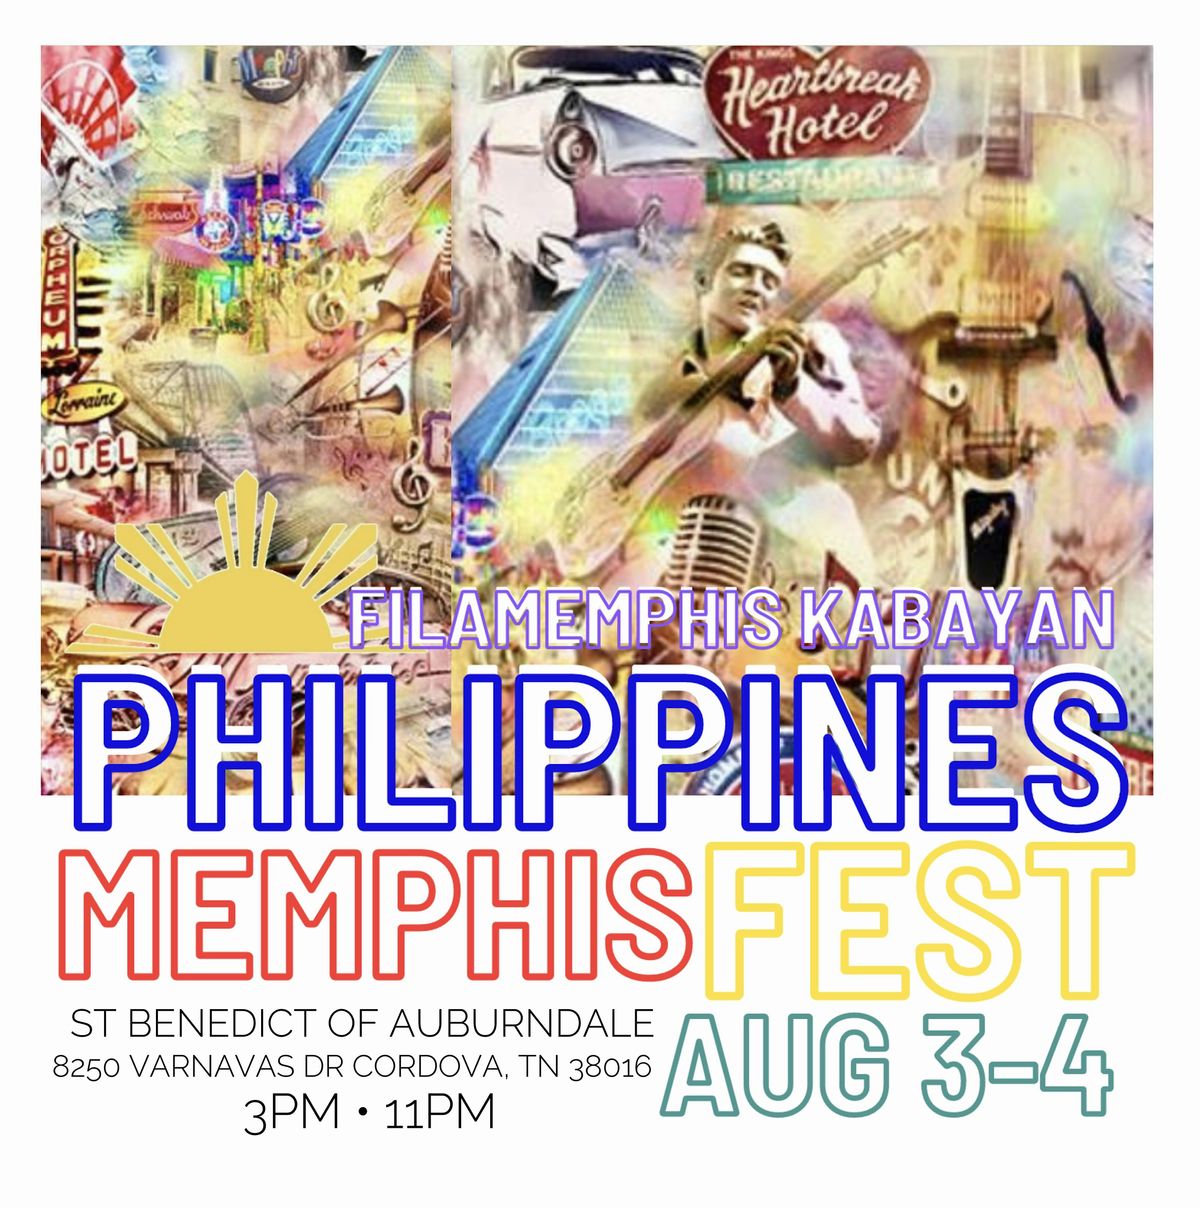 Philippines Fest  X  FILAMemphis Kabayan            (DAY TWO)